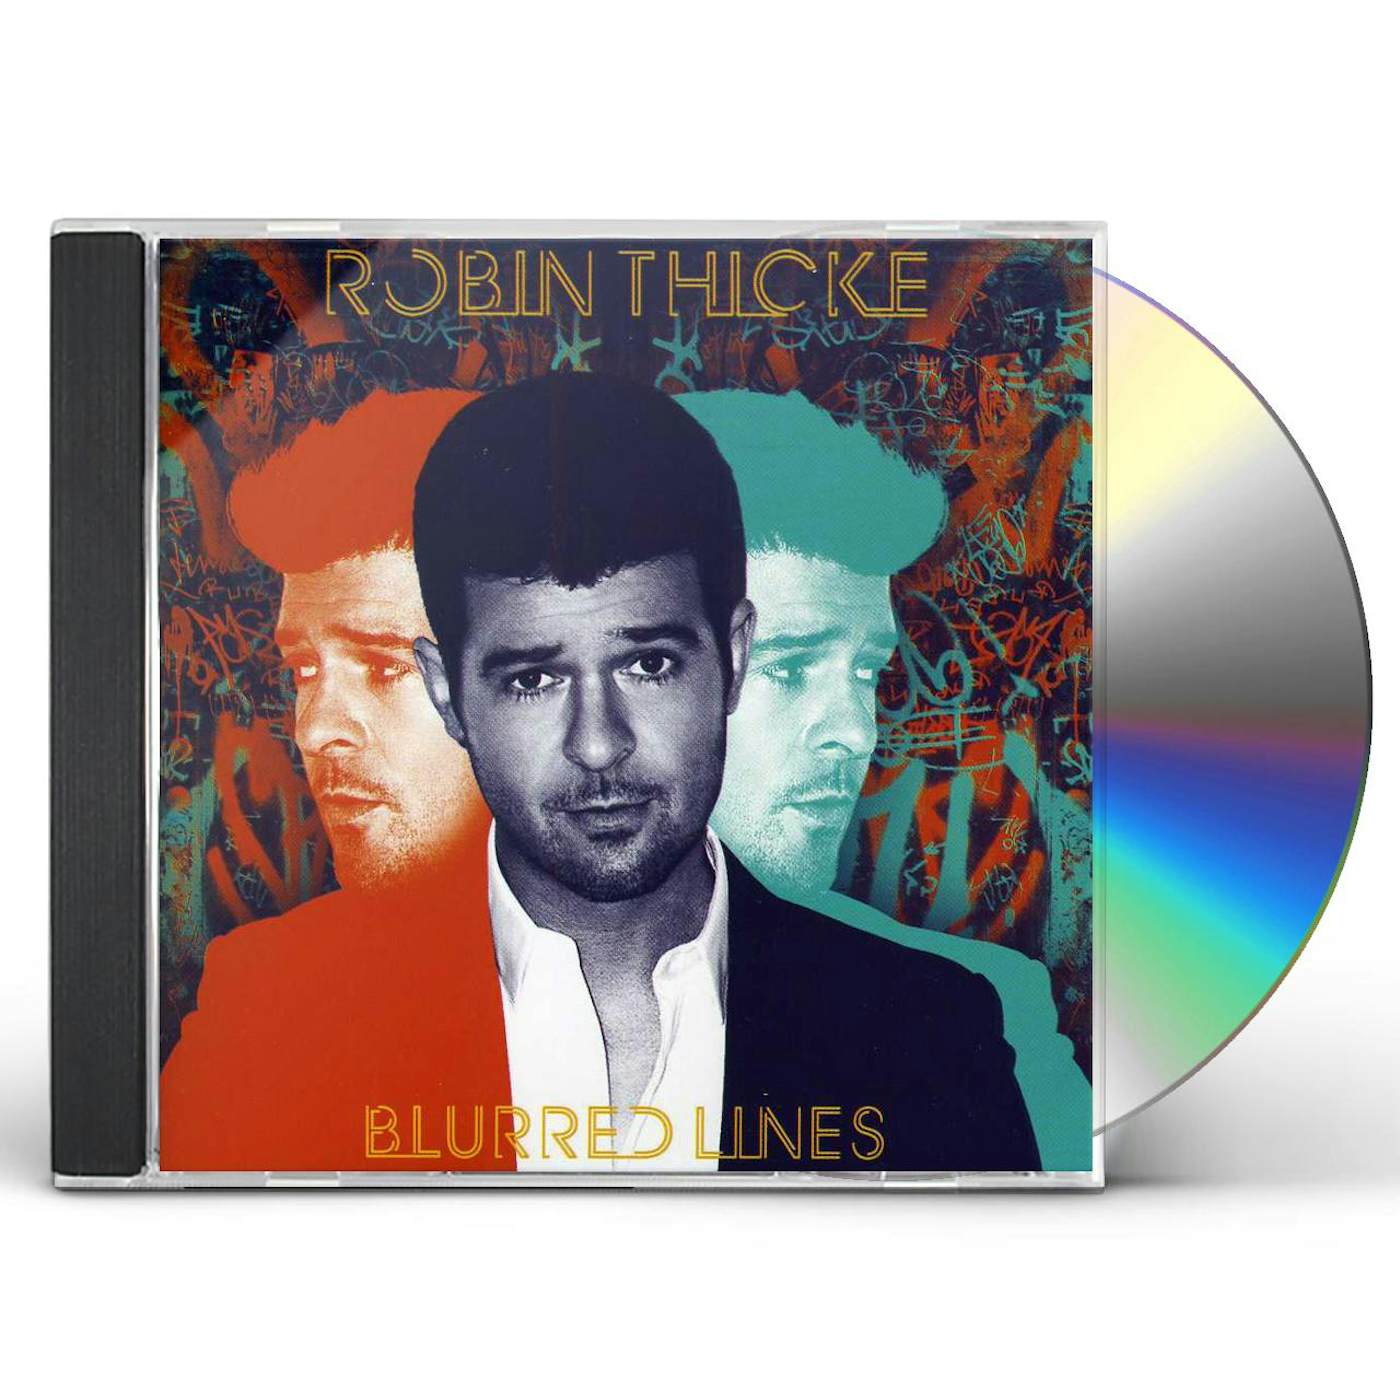 Robin Thicke BLURRED LINES CD